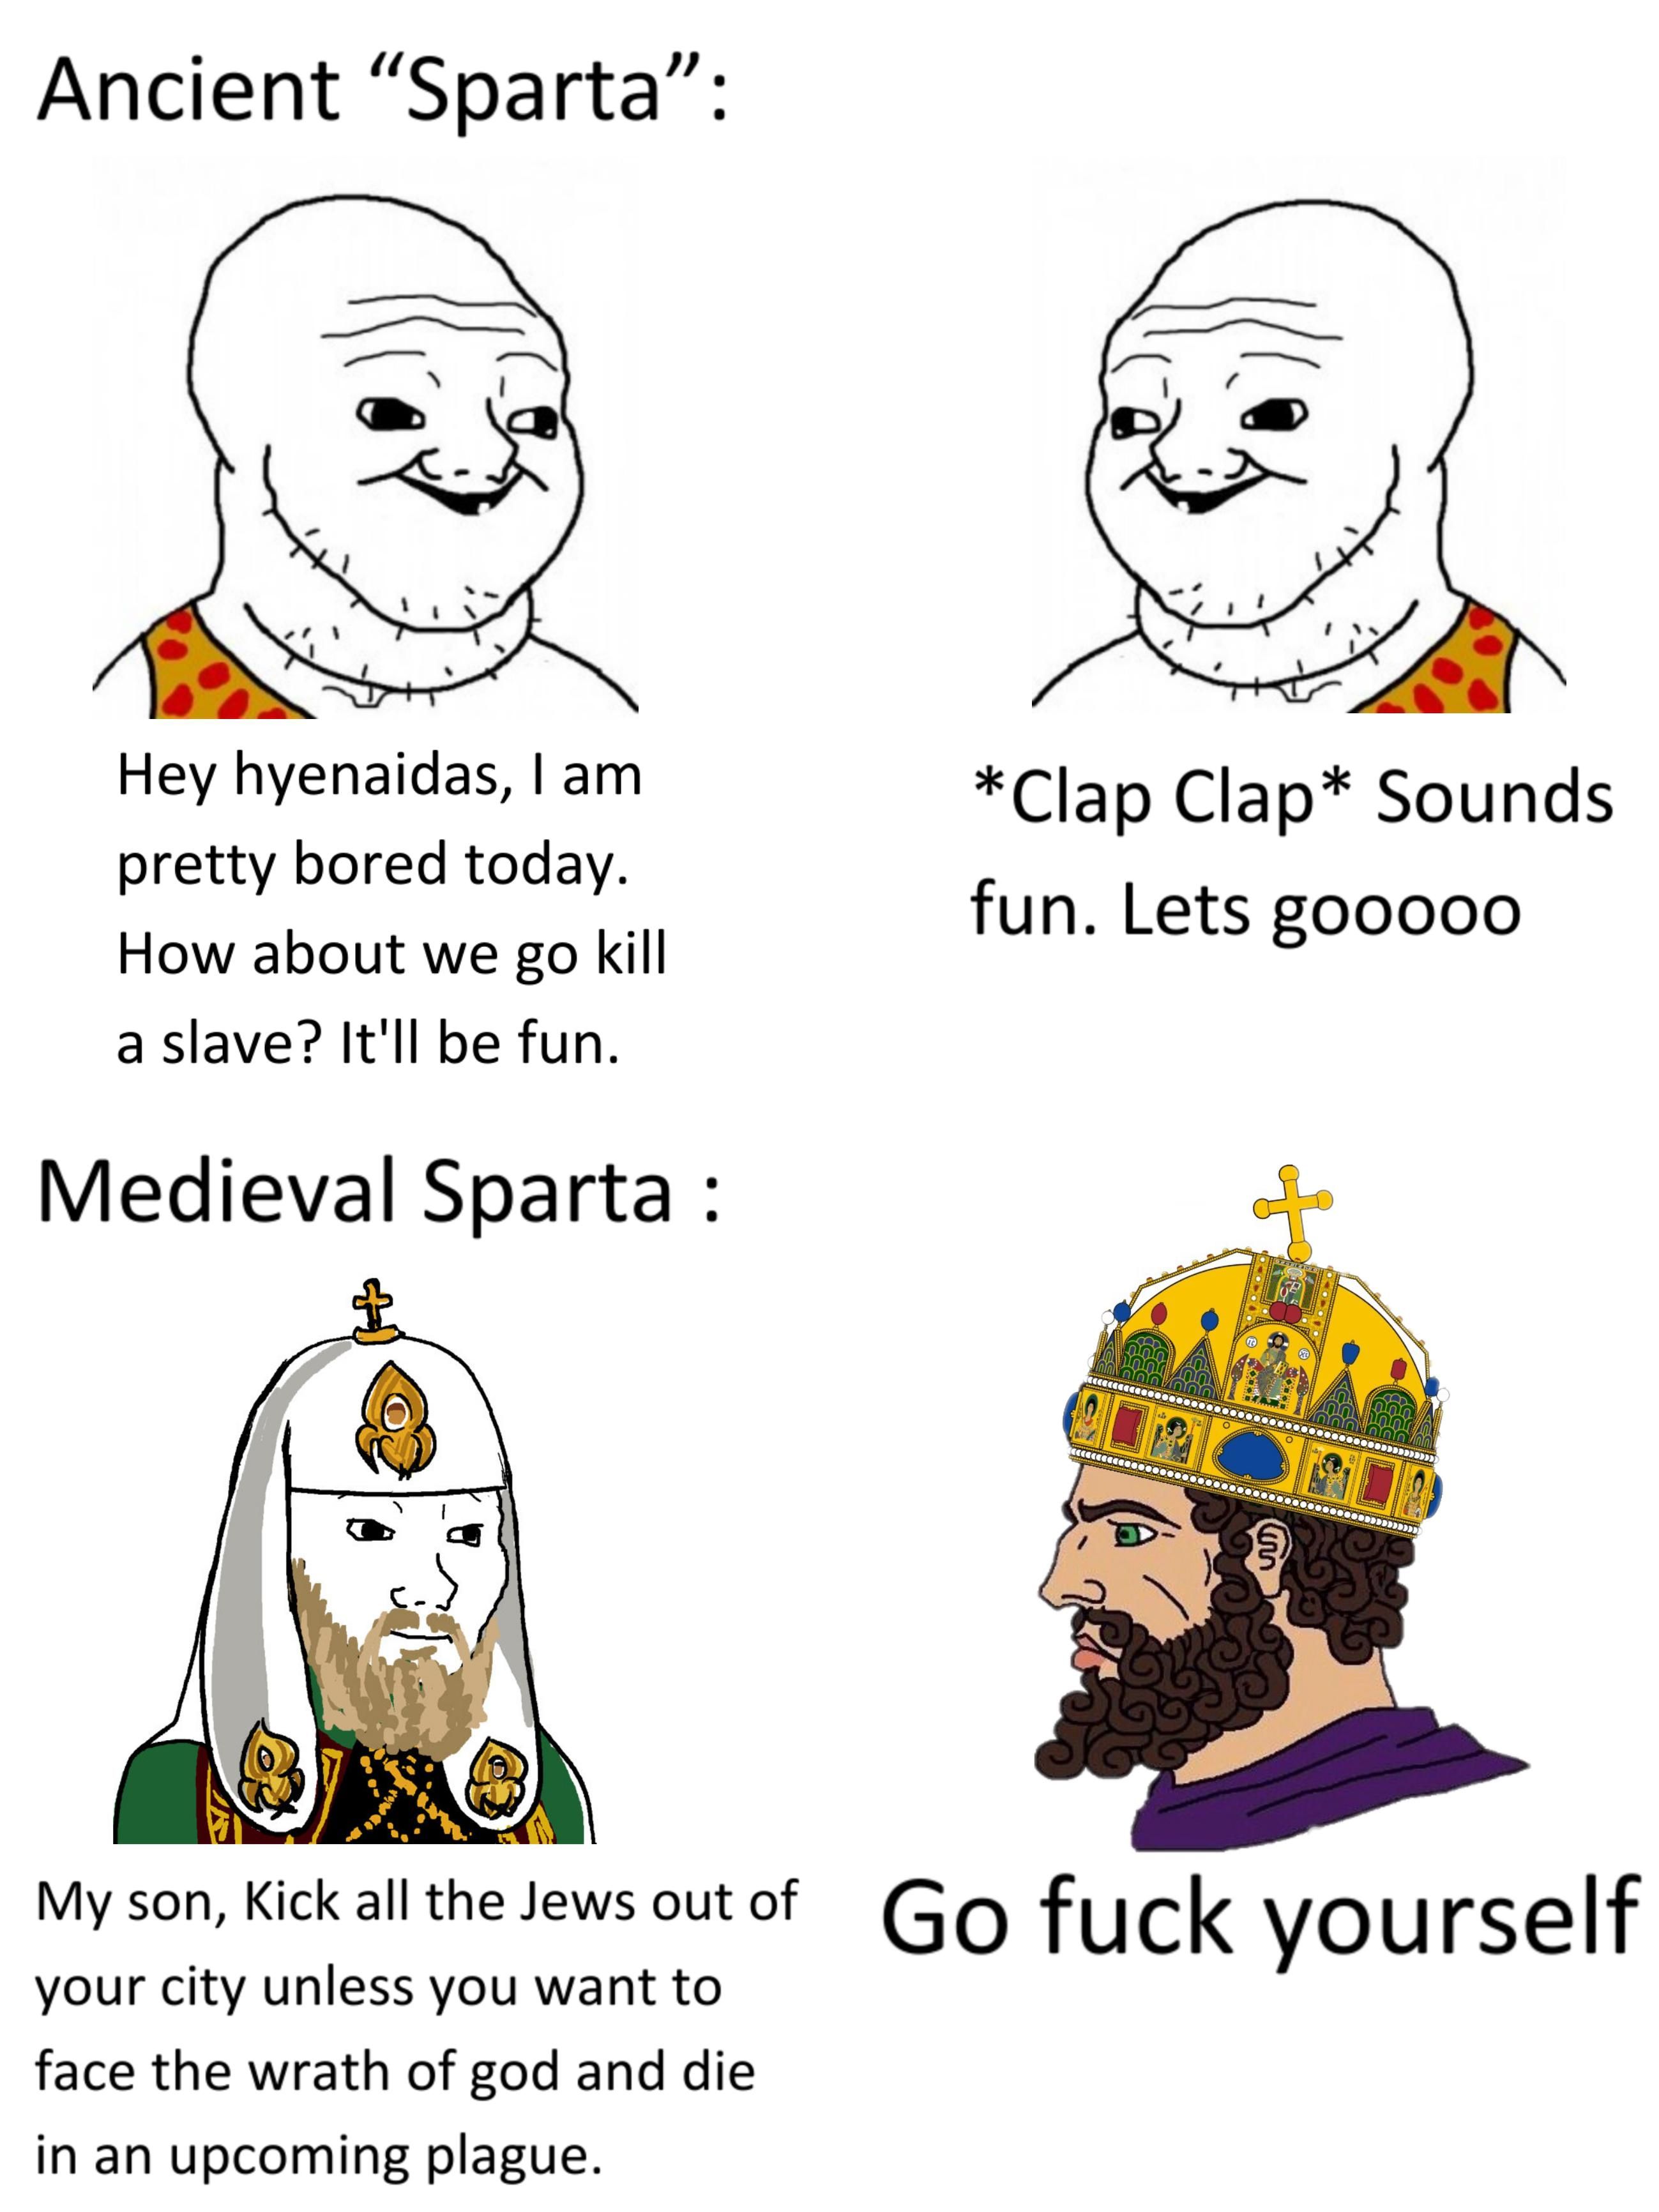 Byzantine Sparta is the only true and civilized Sparta